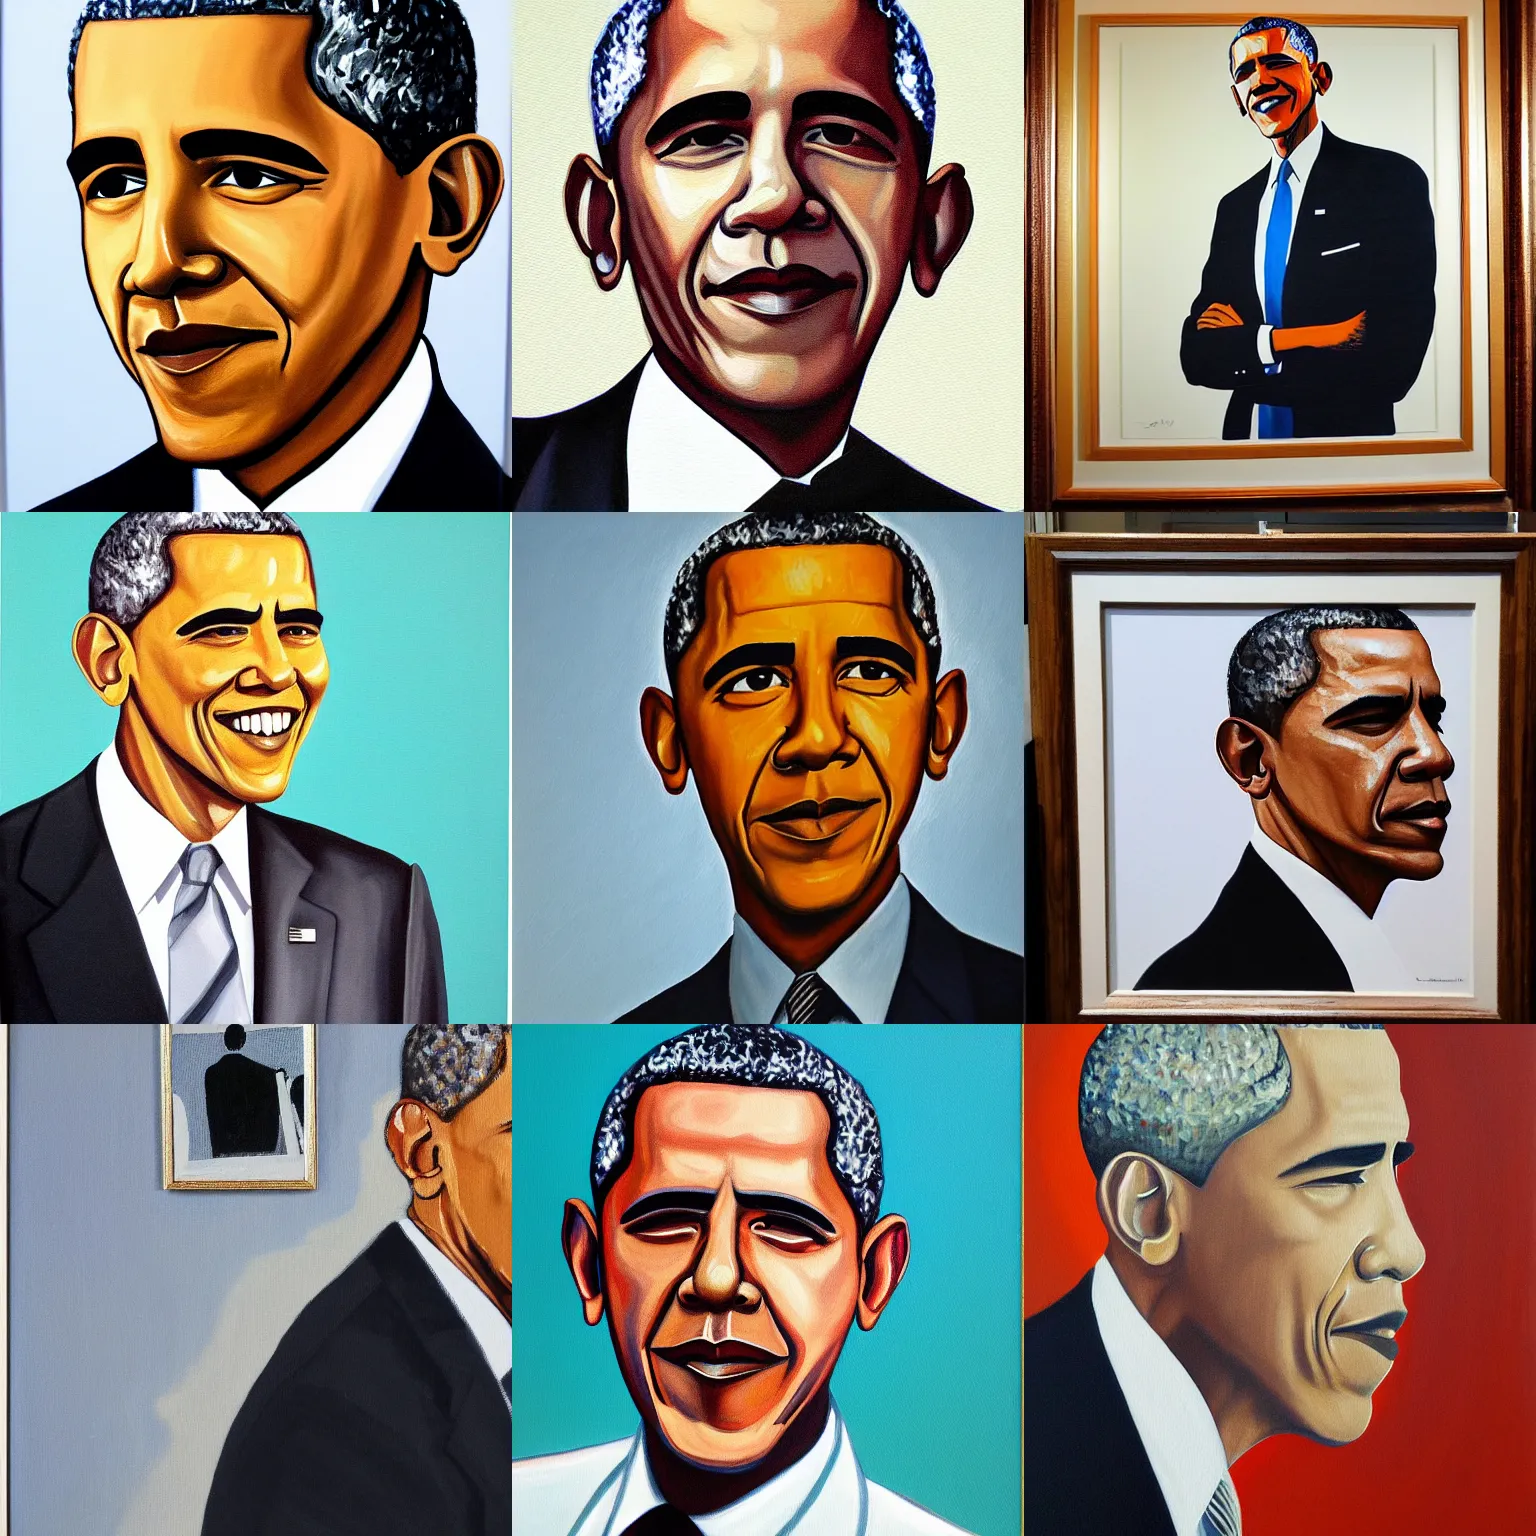 Prompt: A painting by Arne Jacobsen of Barack Obama